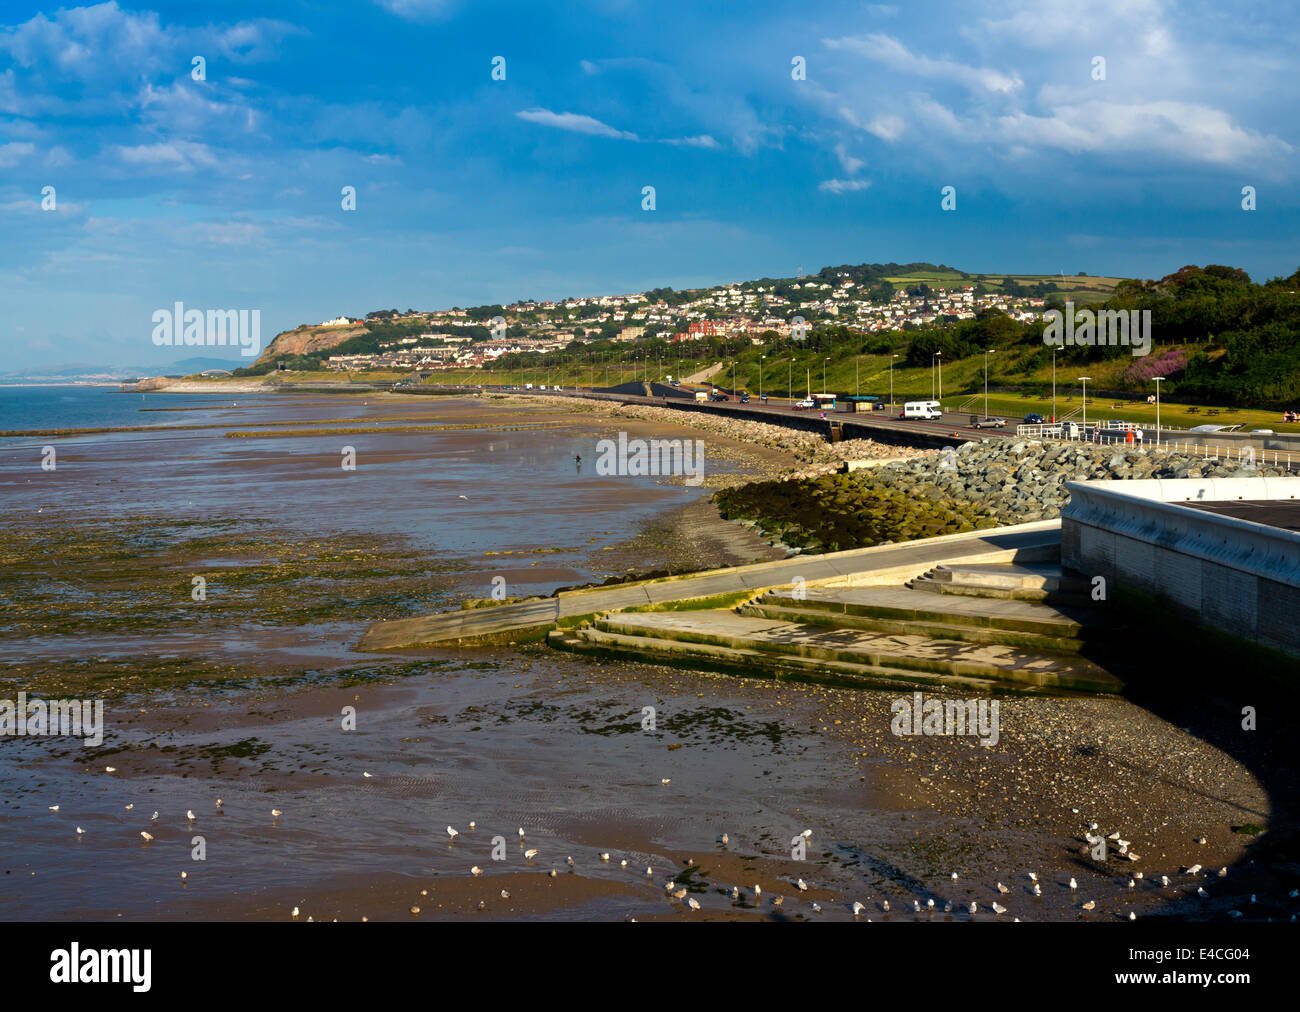 The beach and coastline at Colwyn Bay a traditional seaside resort in Conwy on the North Wales coast UK Stock Photo